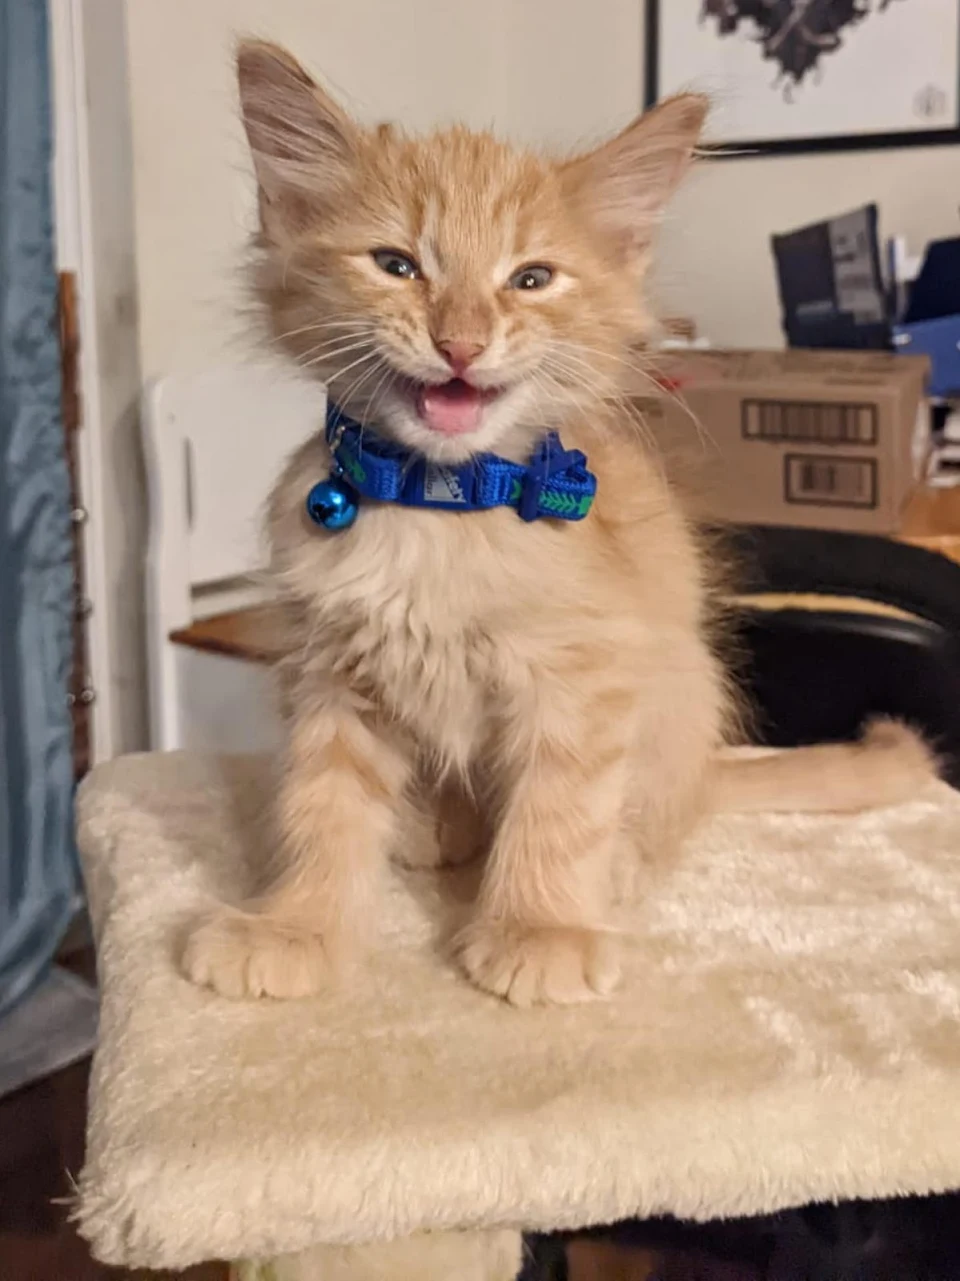 Meet Purrcy, the newest addition to my family. He is such a ham. 😹